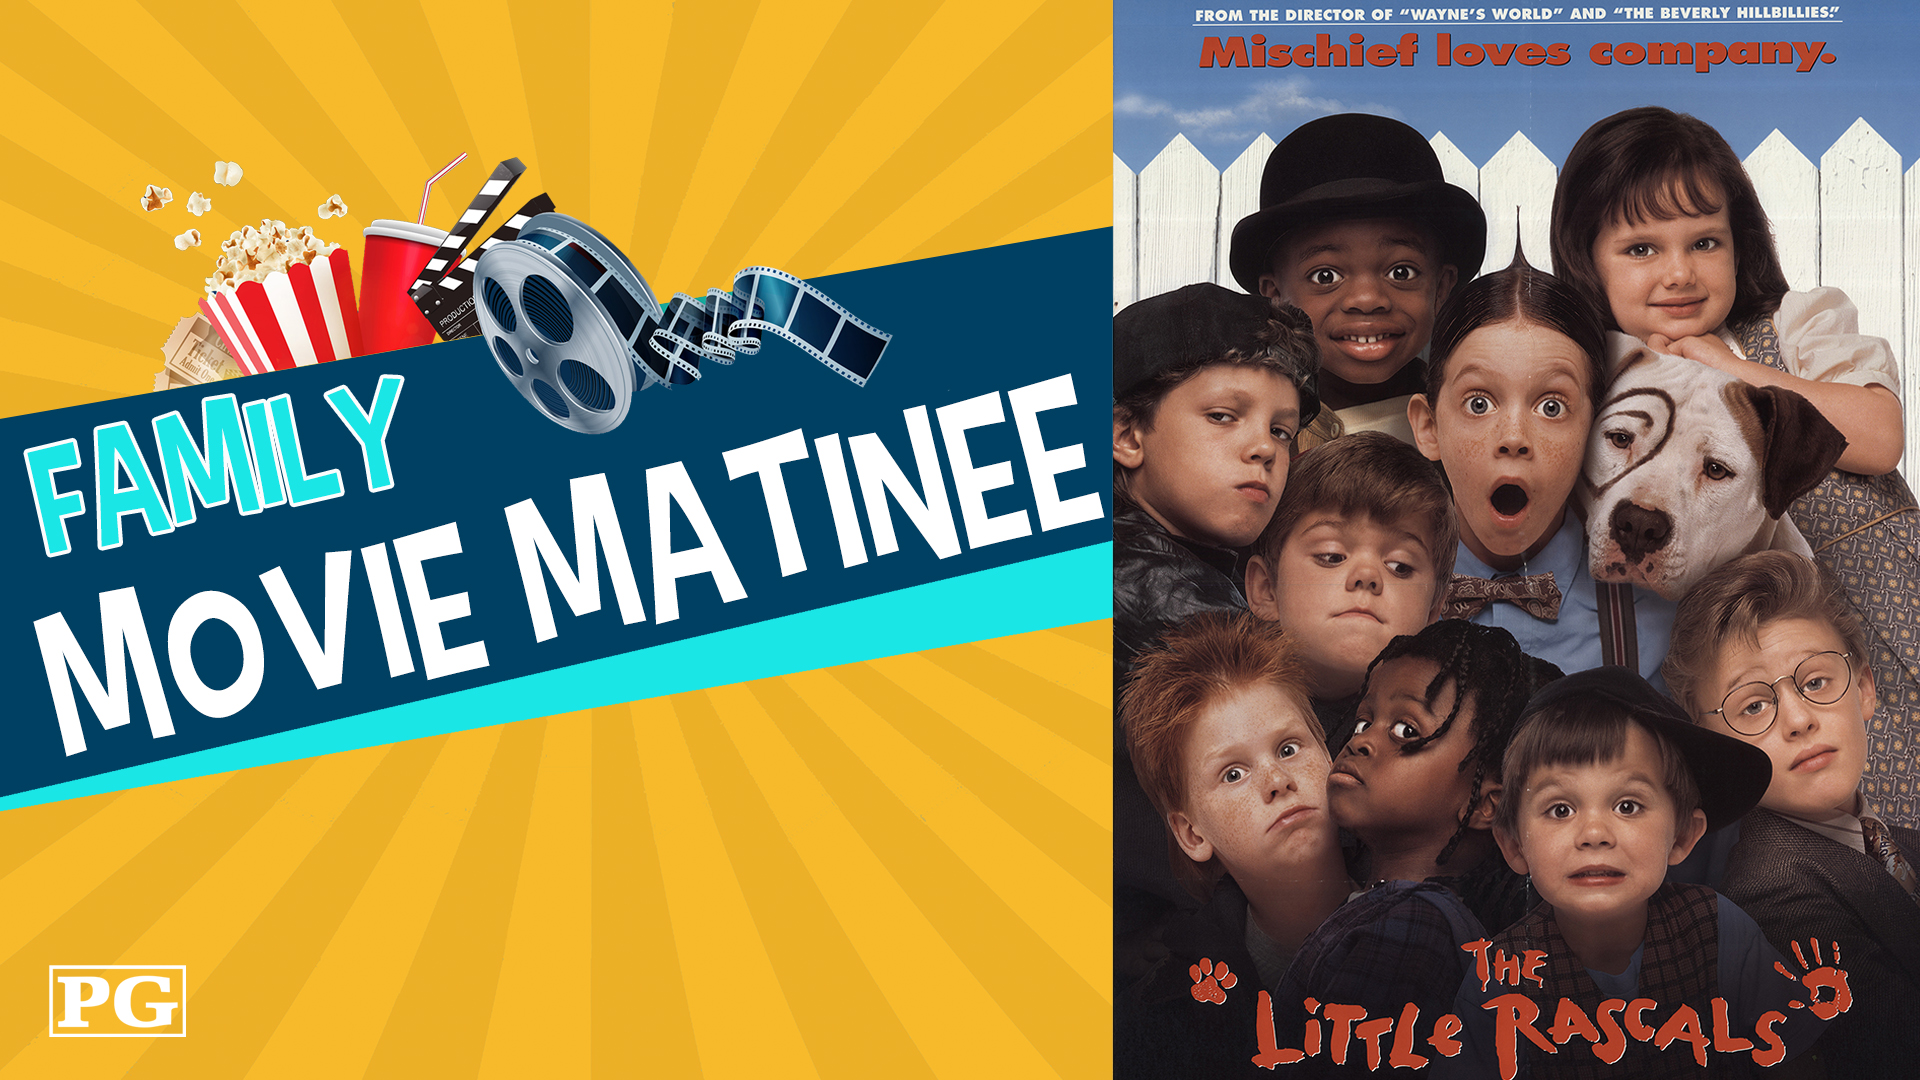 Image reads "Family Movie Matinee" against a orange sunburst background. A bucket of popcorn, a cup, and a movie reel are above the title. The movie title for The Little Rascals is to the right of the title.